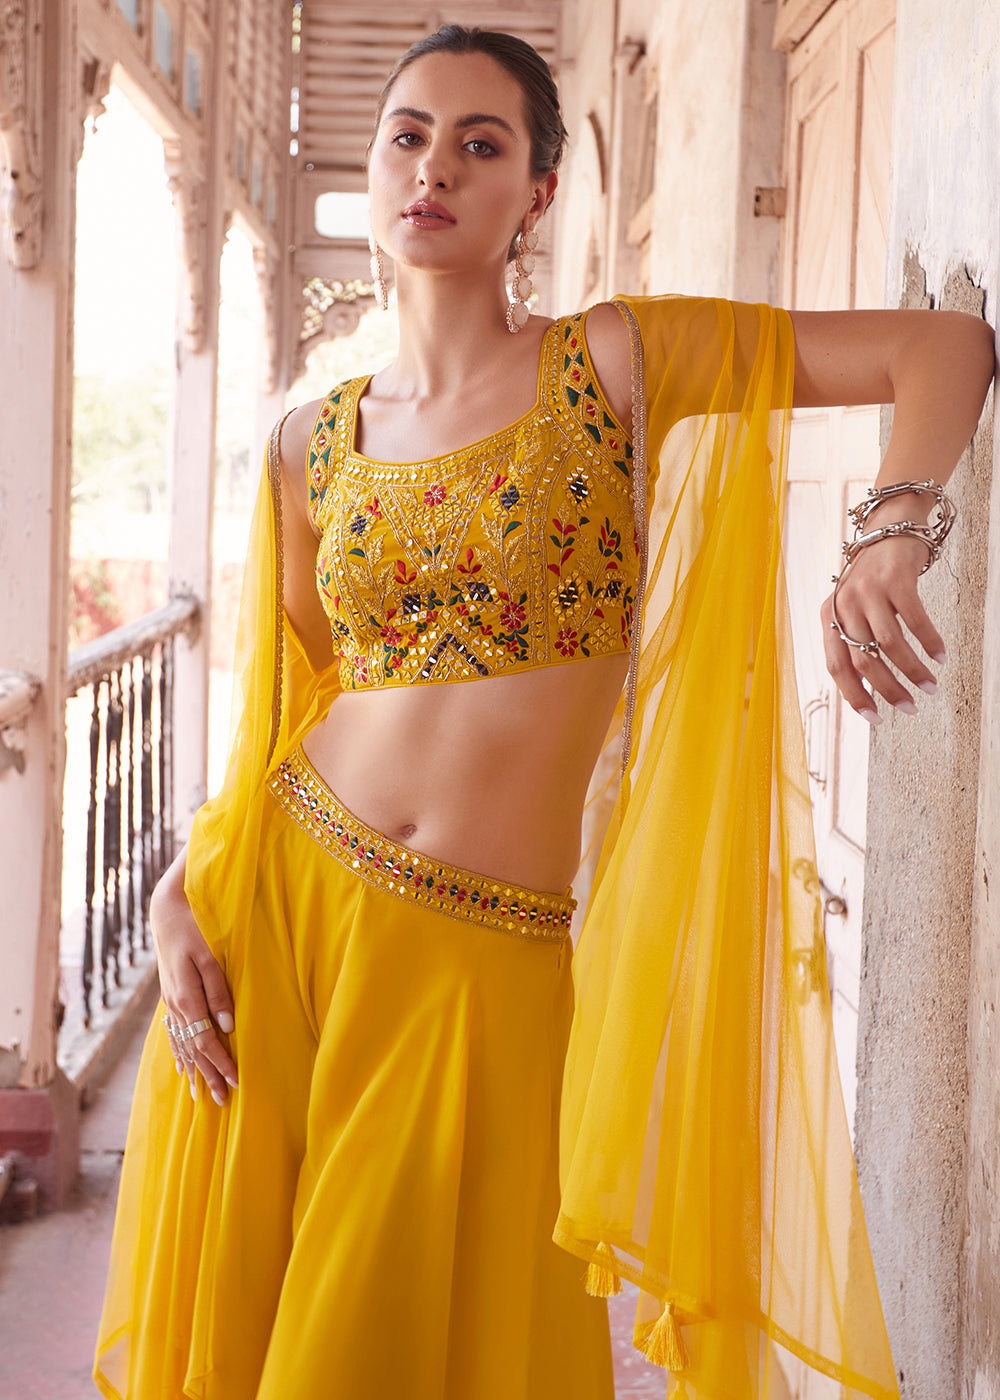 Shop Now Stunning Yellow Designer Crop Top Style Sharara Suit Online at Empress Clothing in USA, UK, Canada, Italy & Worldwide.